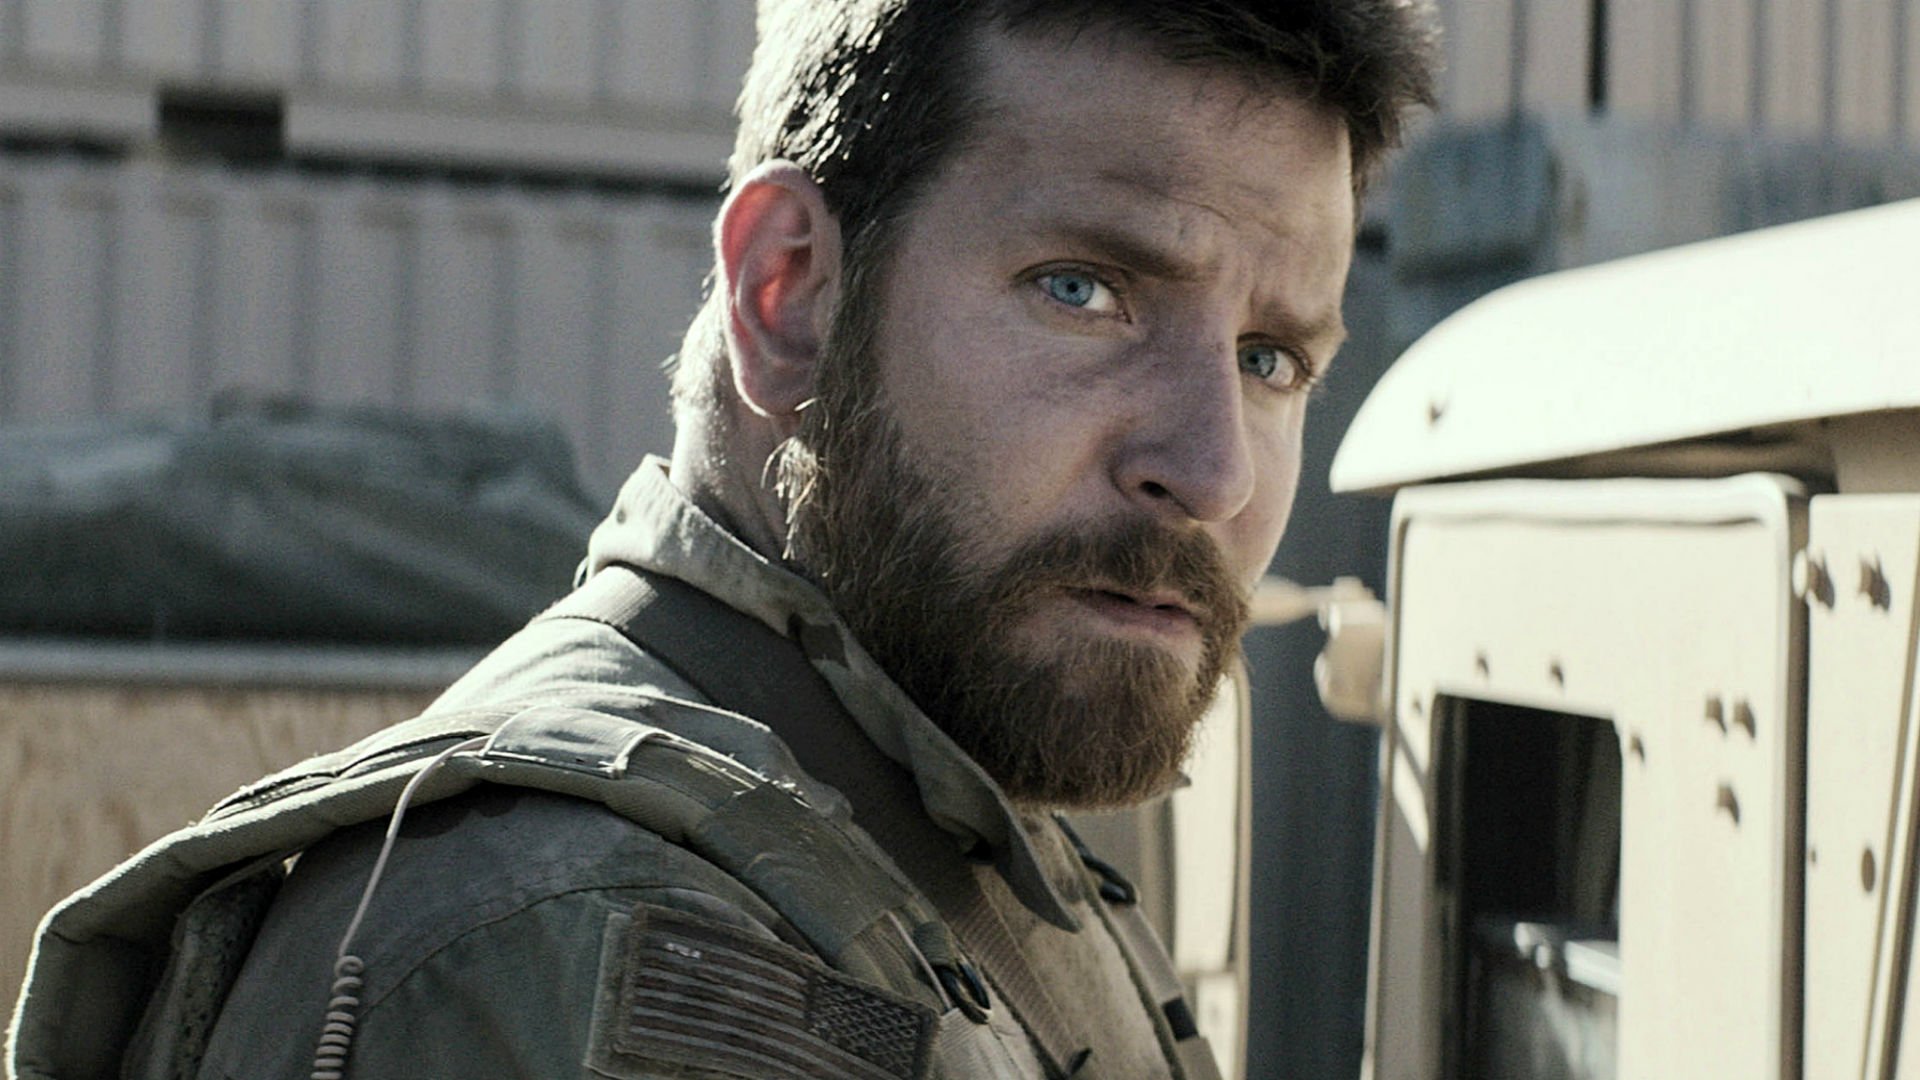 american, Sniper, Biography, Action, Military, Warrior, Soldier, 1americansniper, Clint, Eastwood, War, Fighting Wallpaper